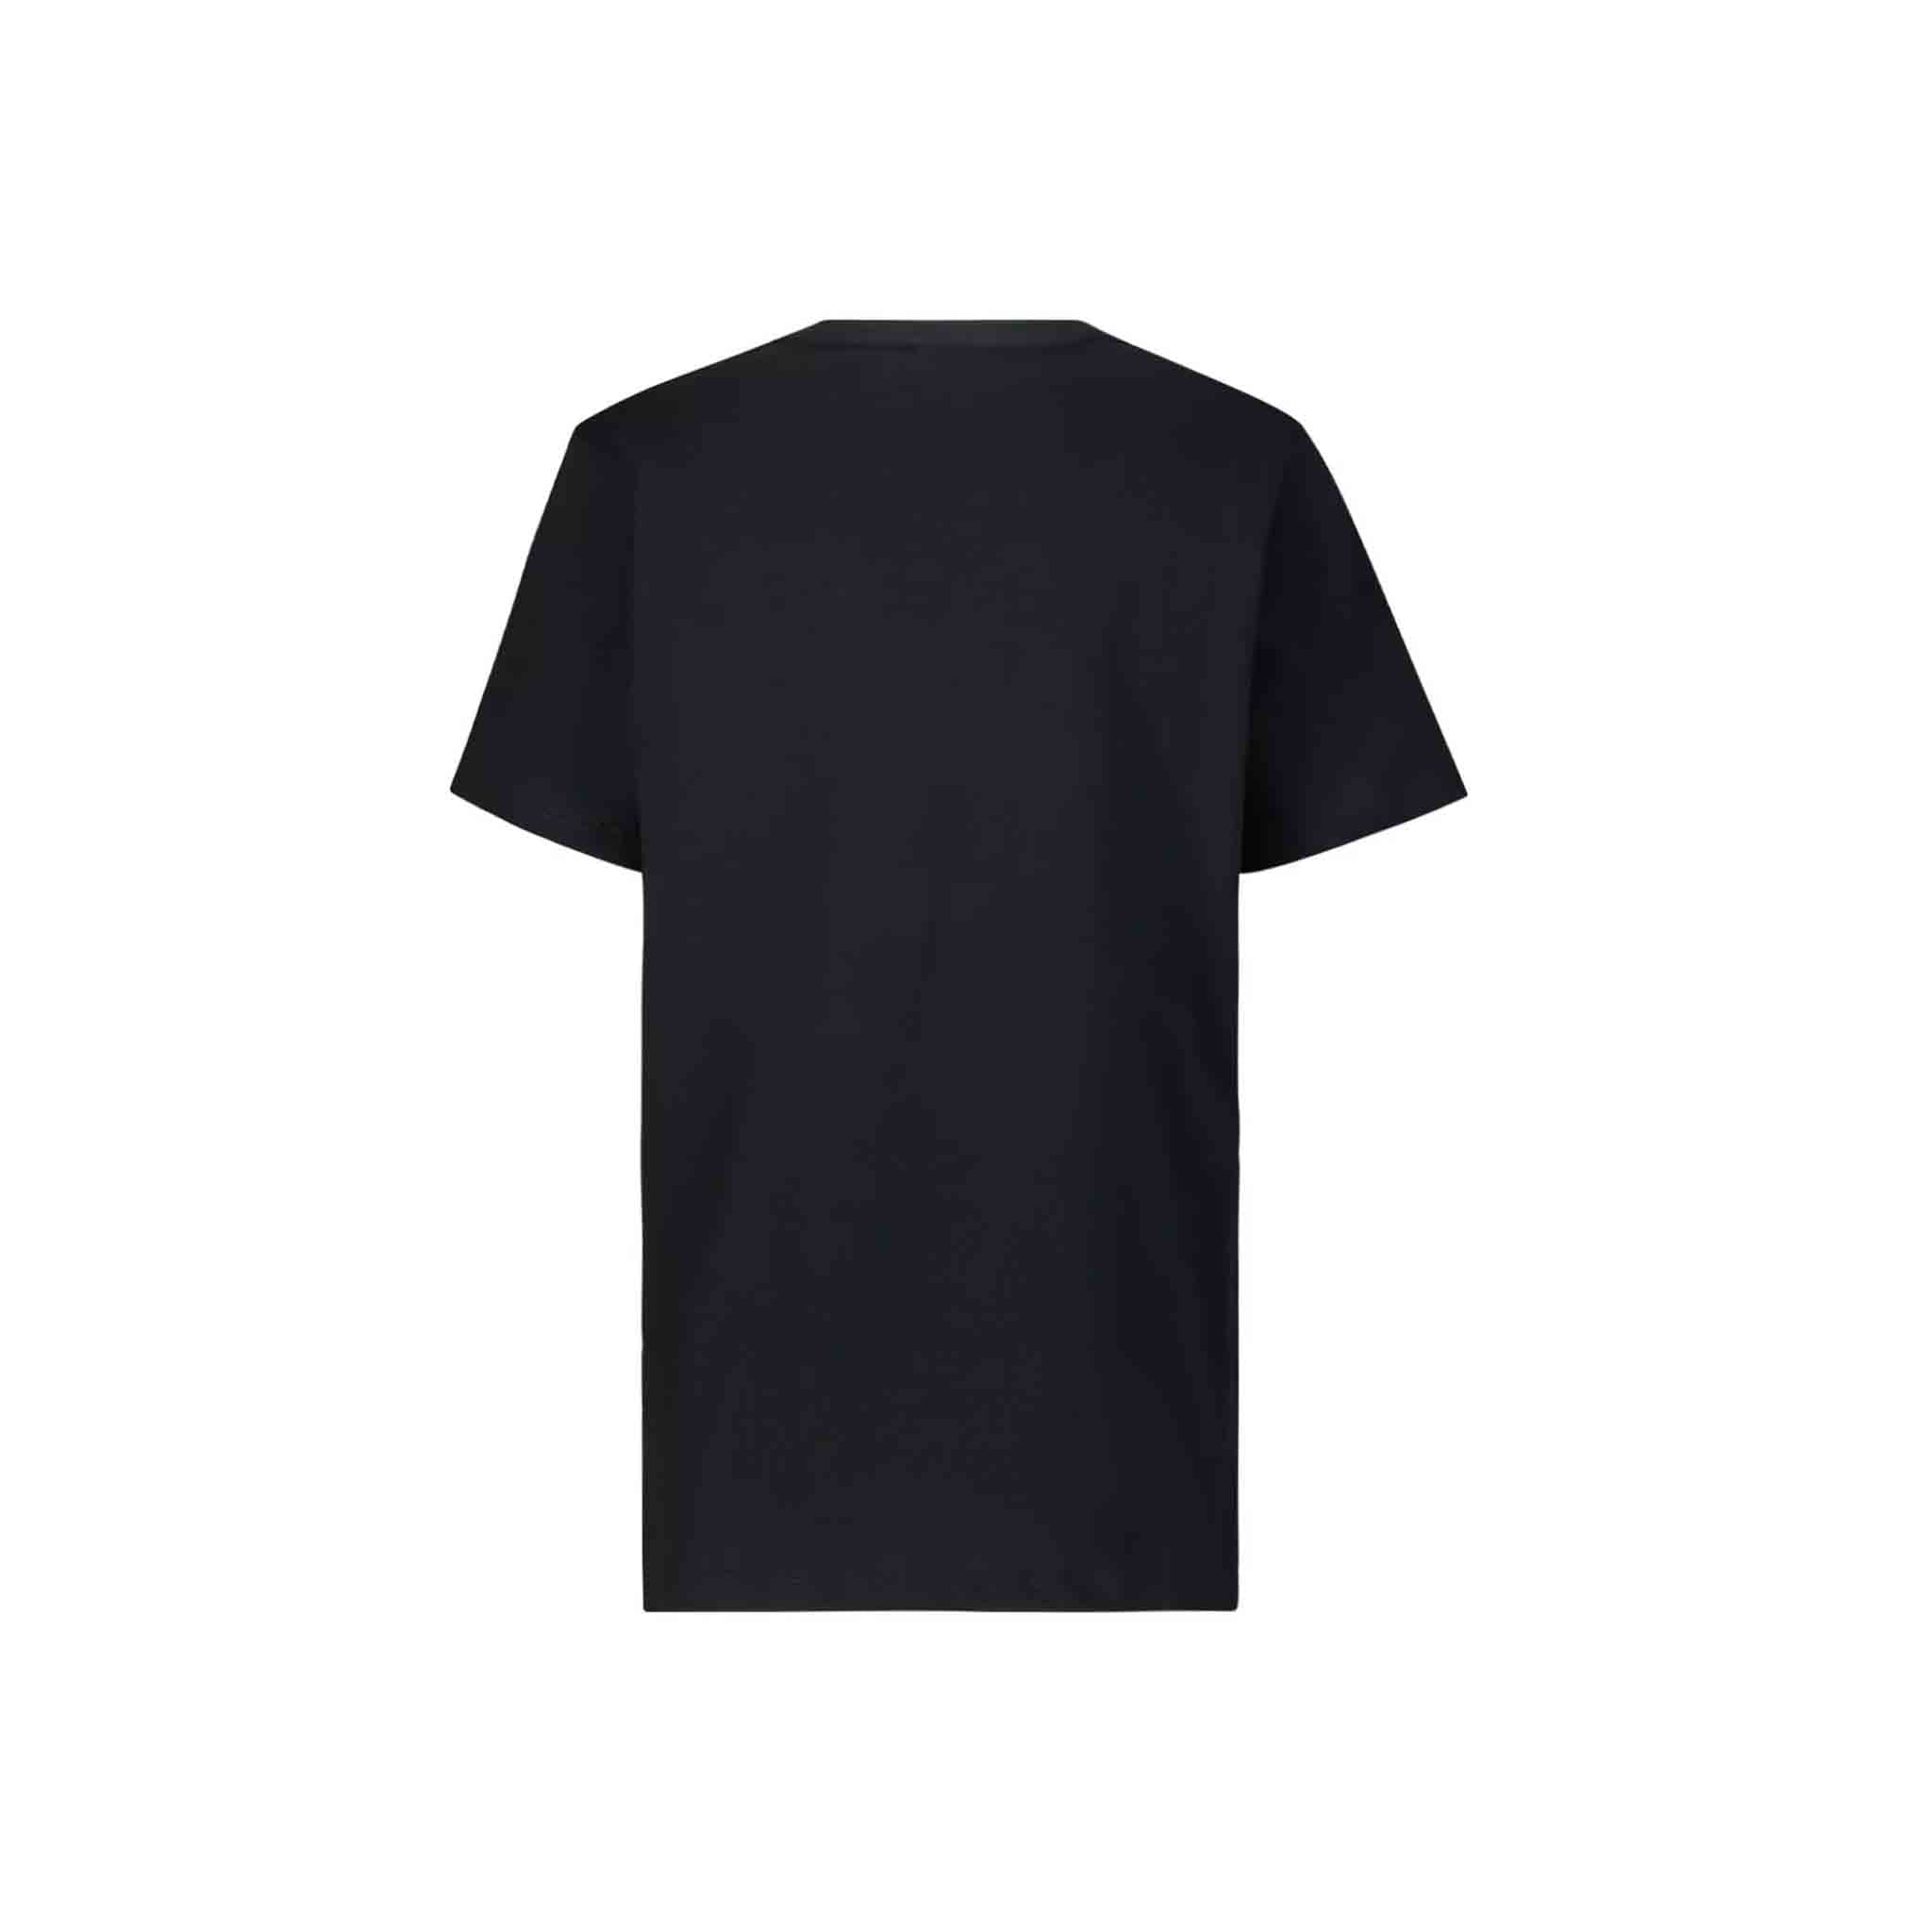 Givenchy Small Logo Slim Fit T-Shirt in Black